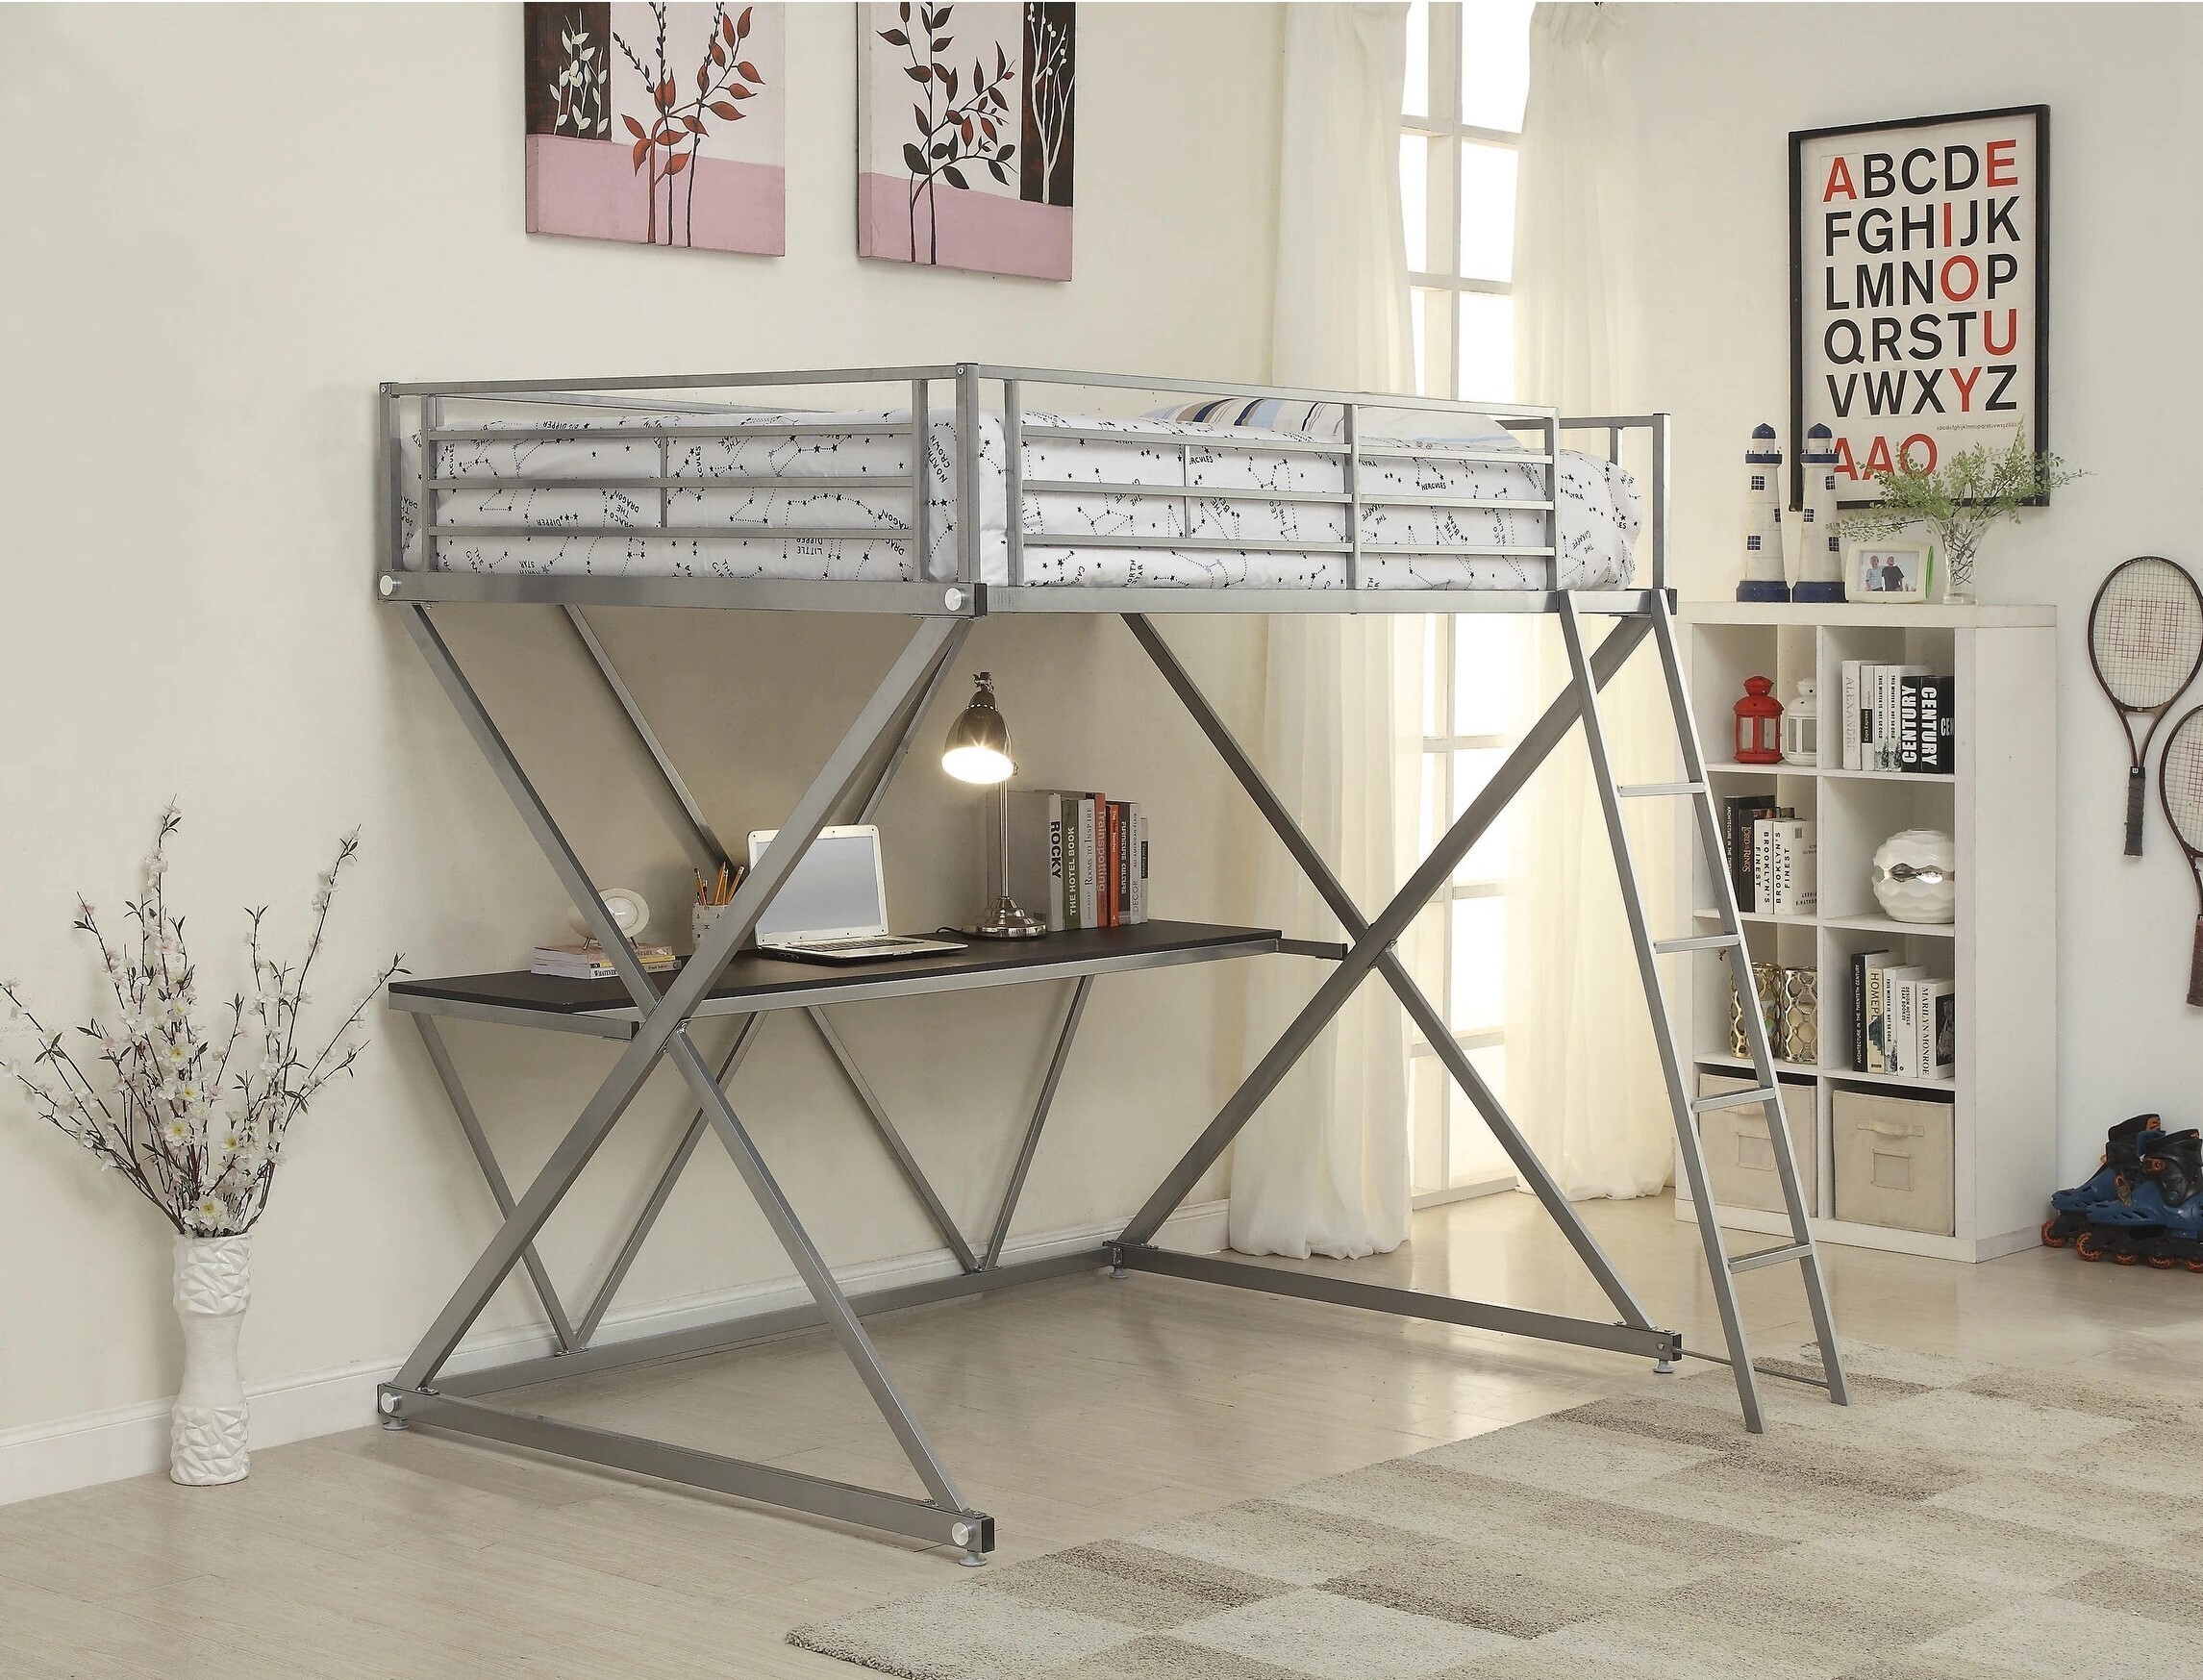 Fashionable X frame Bunk Bed with Desk Underneath for Adults